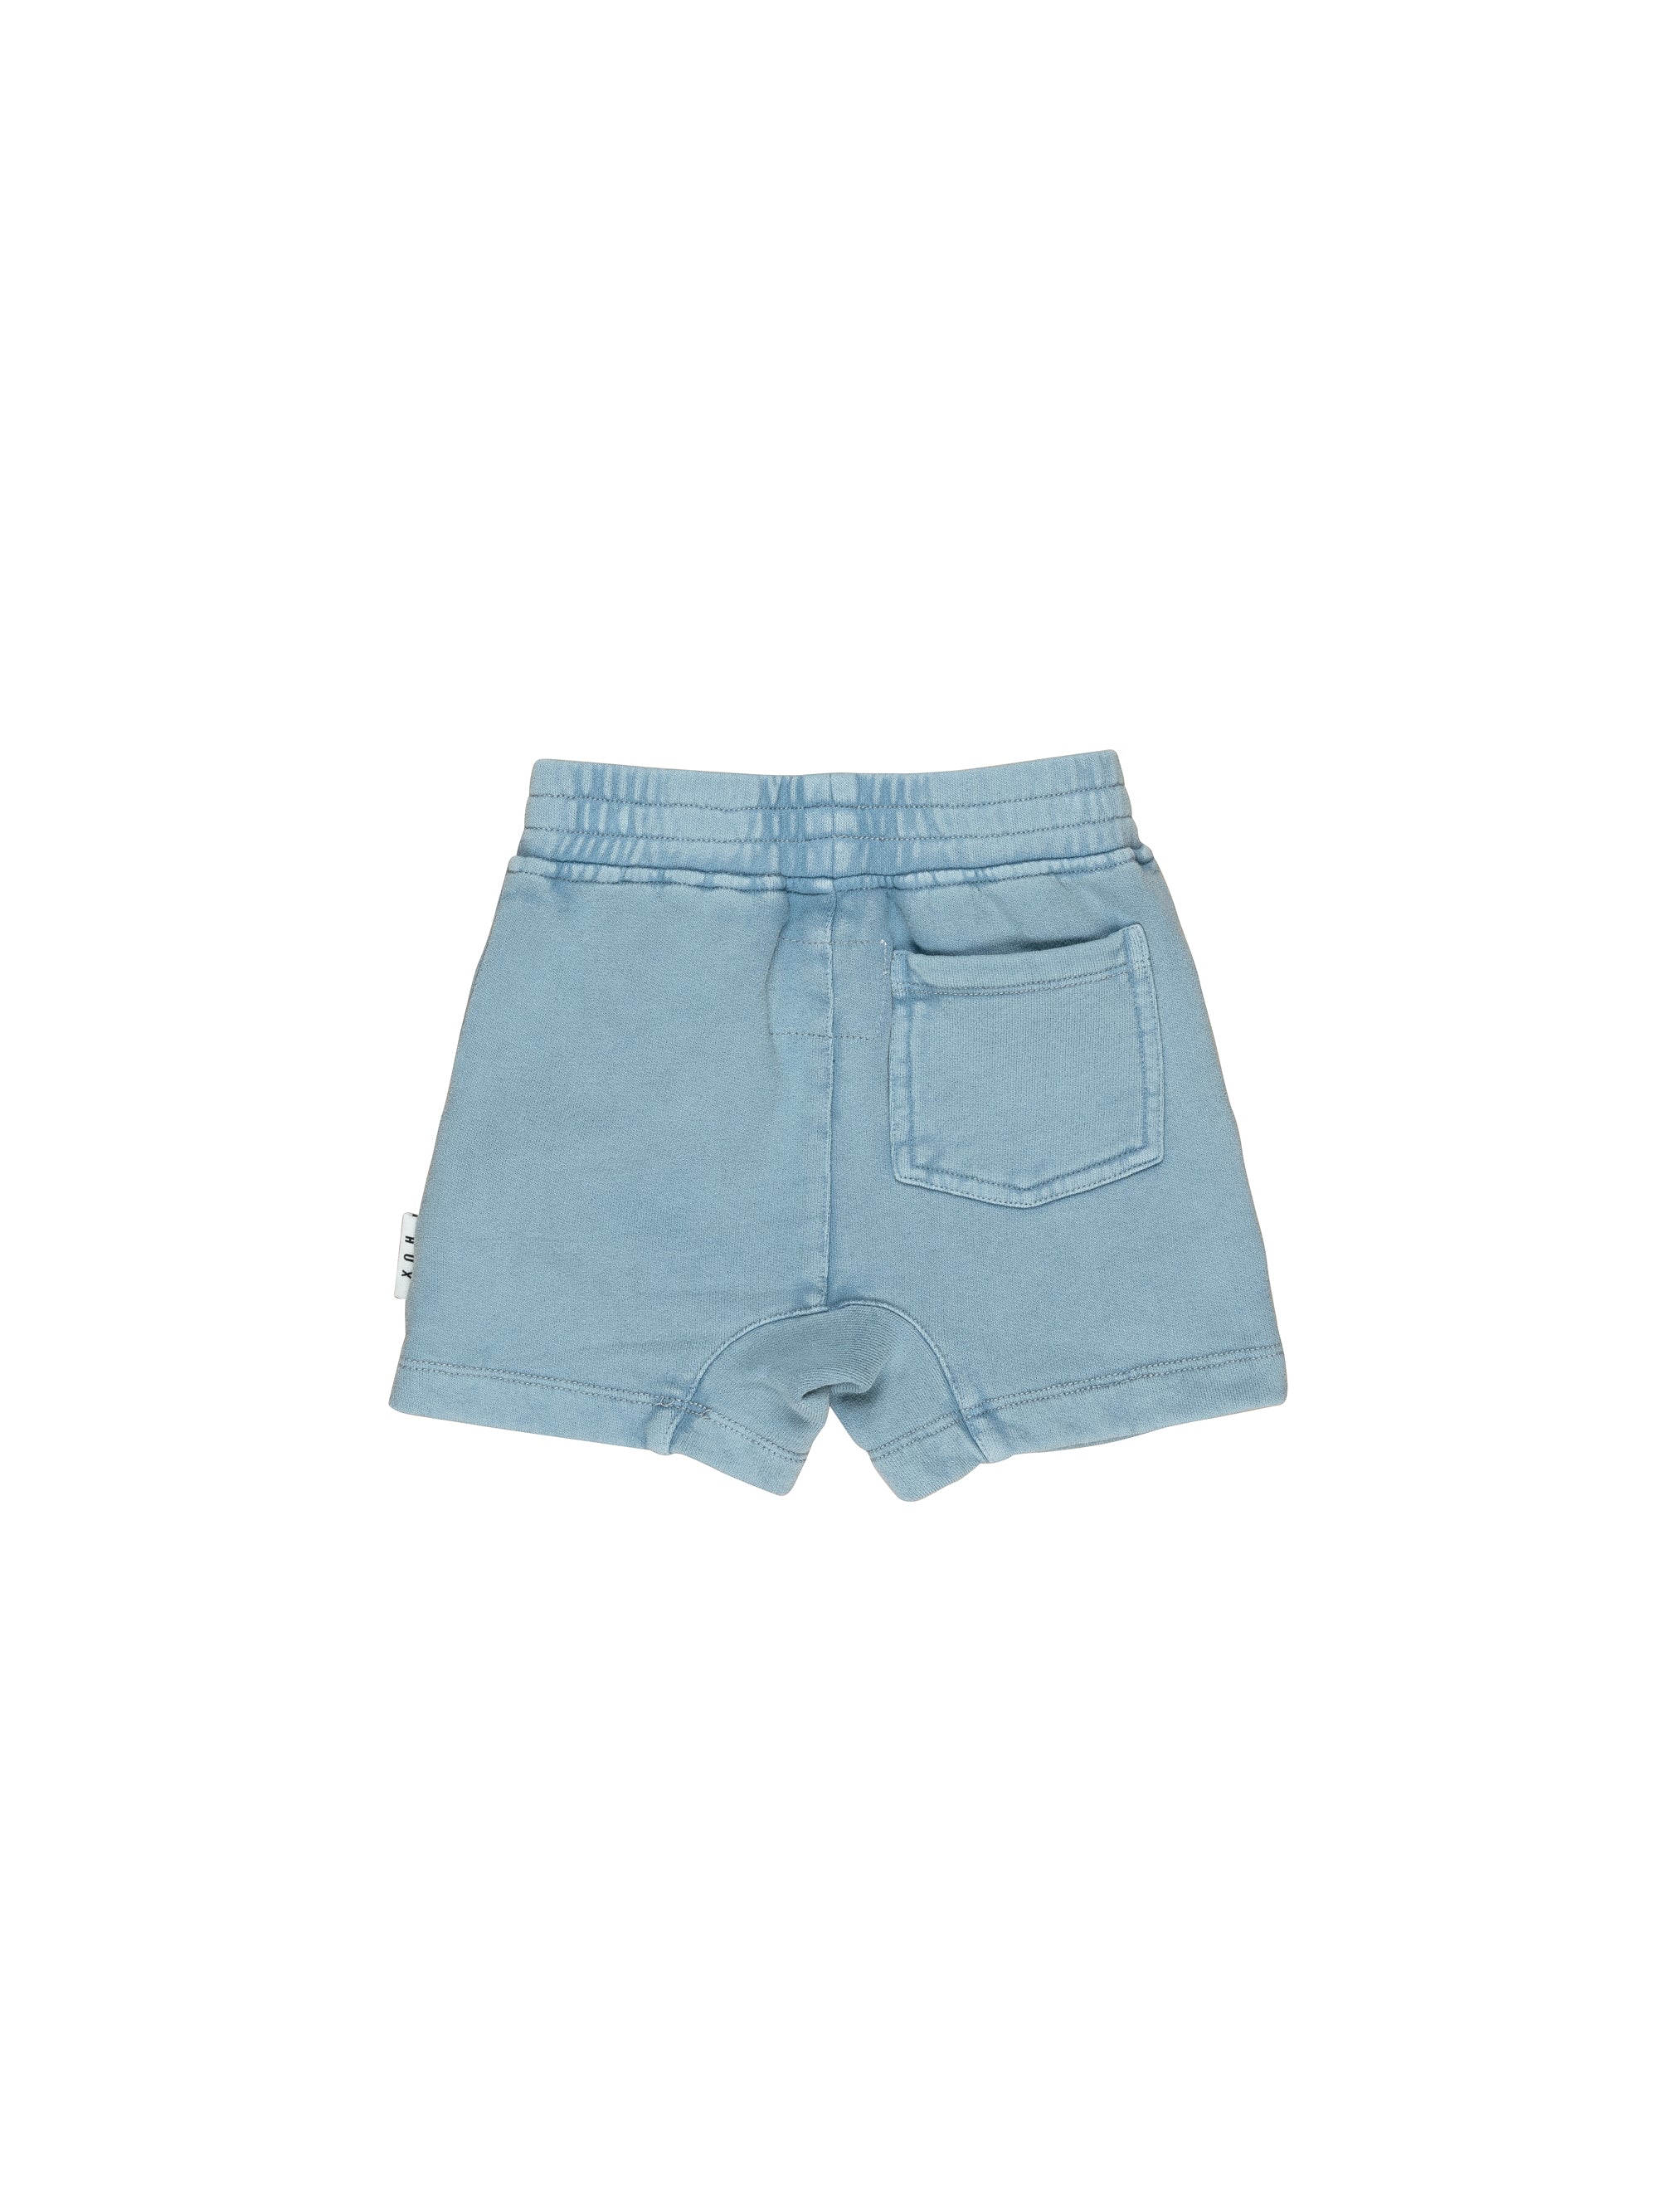 Huxbaby - Vintage Terry Slouch Short